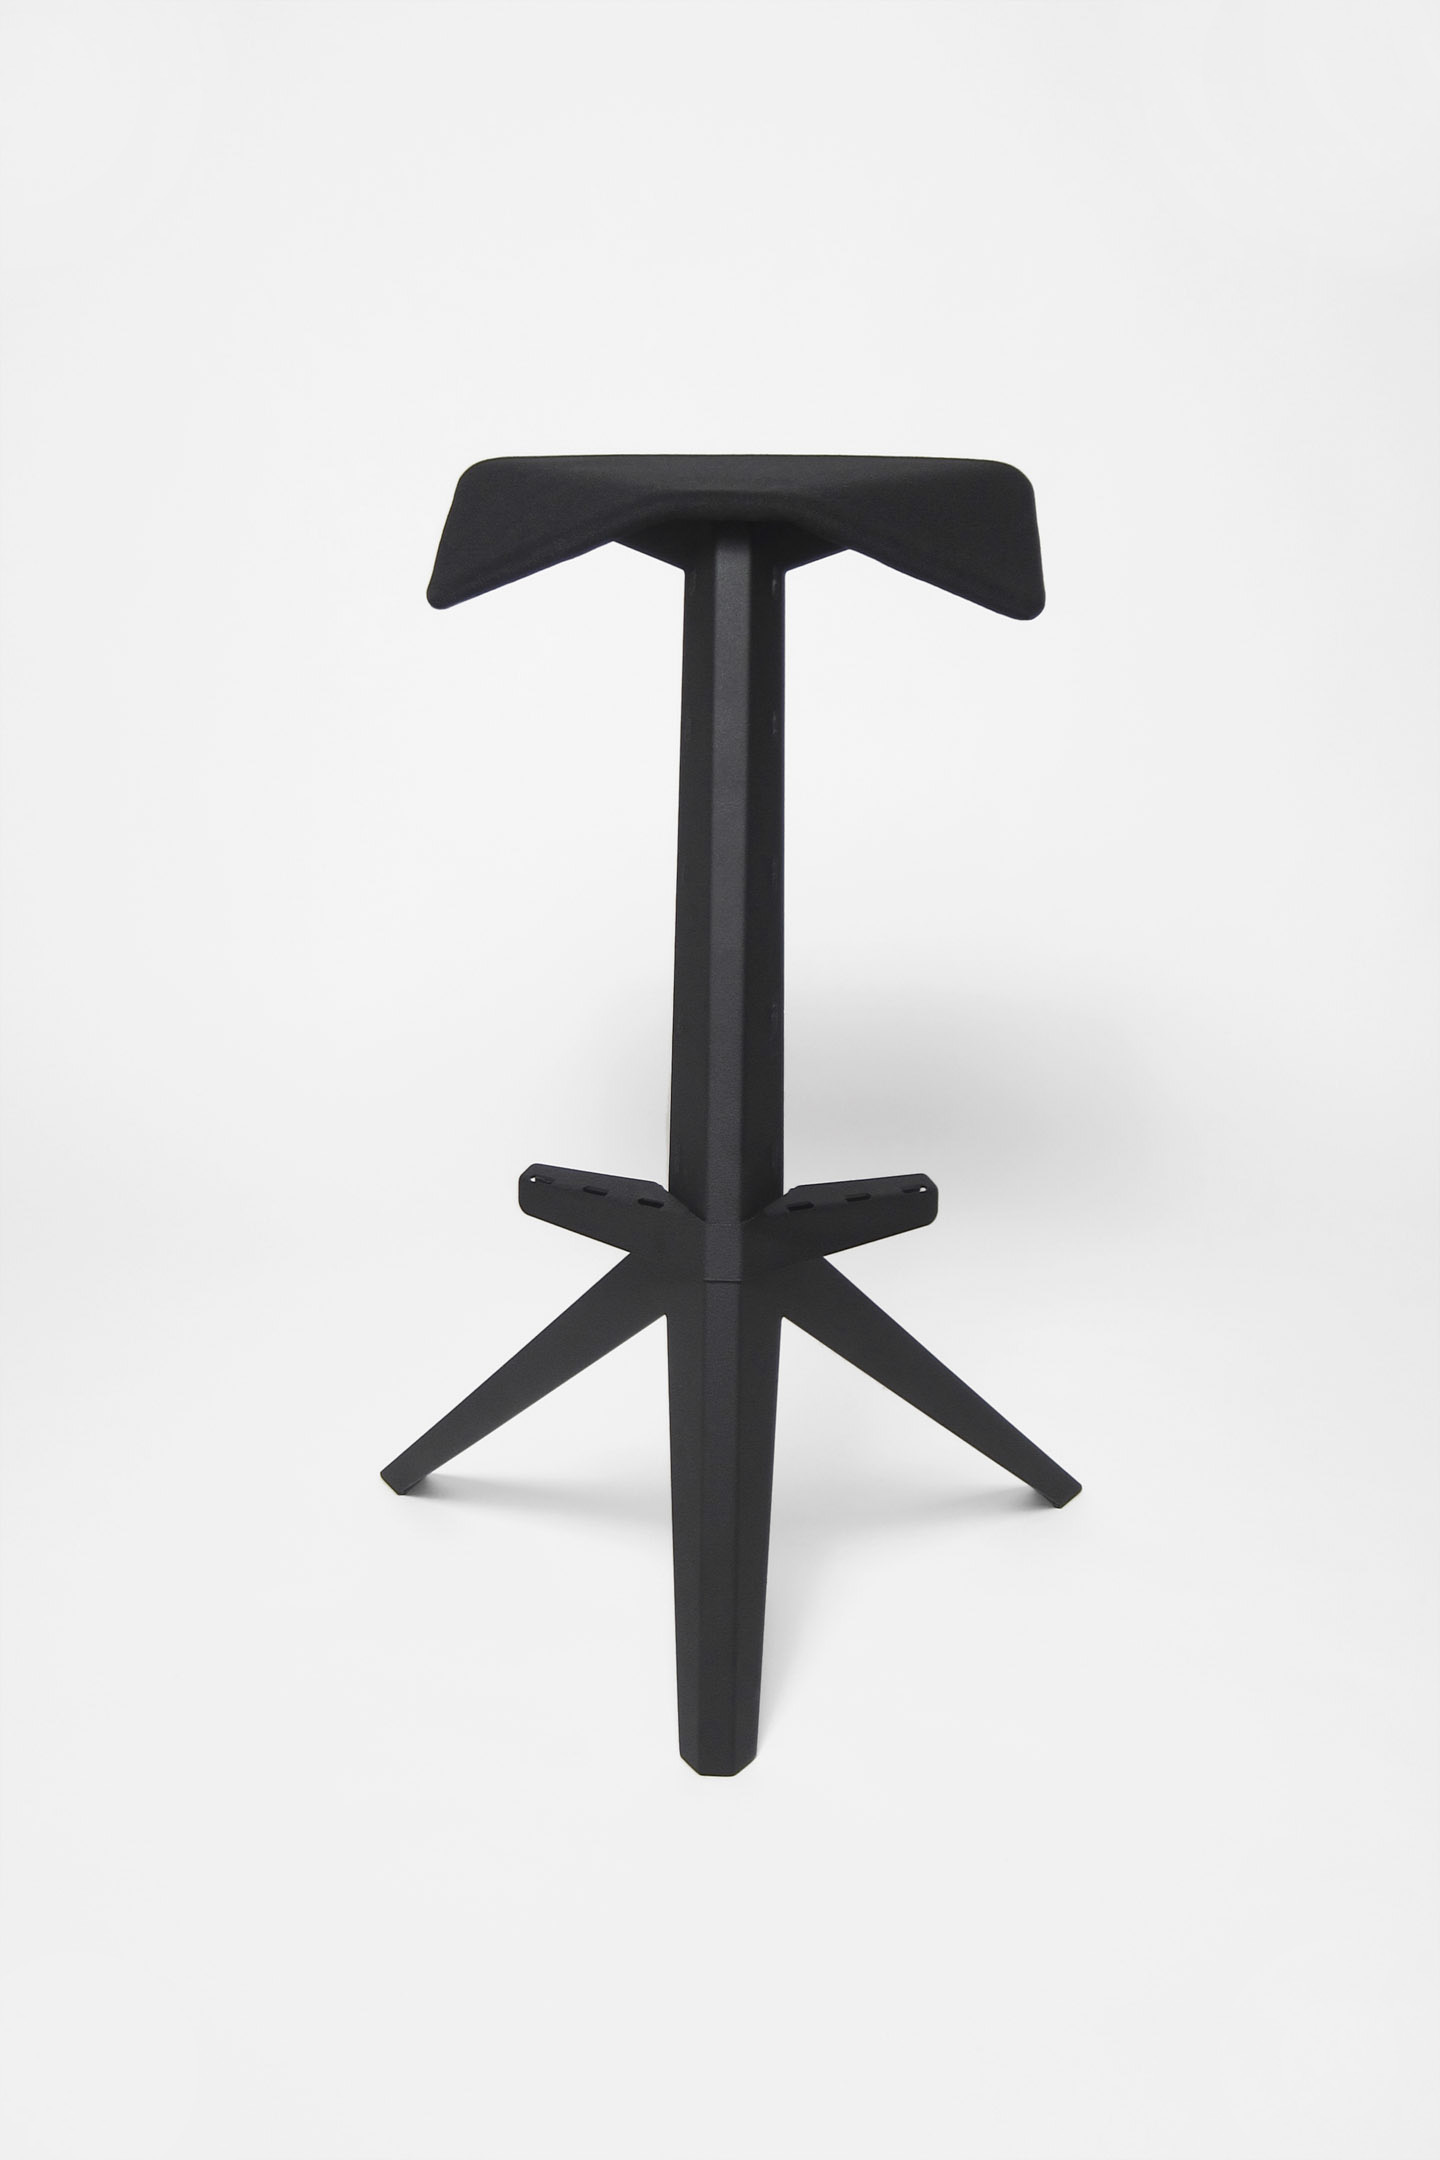 Chabera – Steelworks collection – high stool – Ch